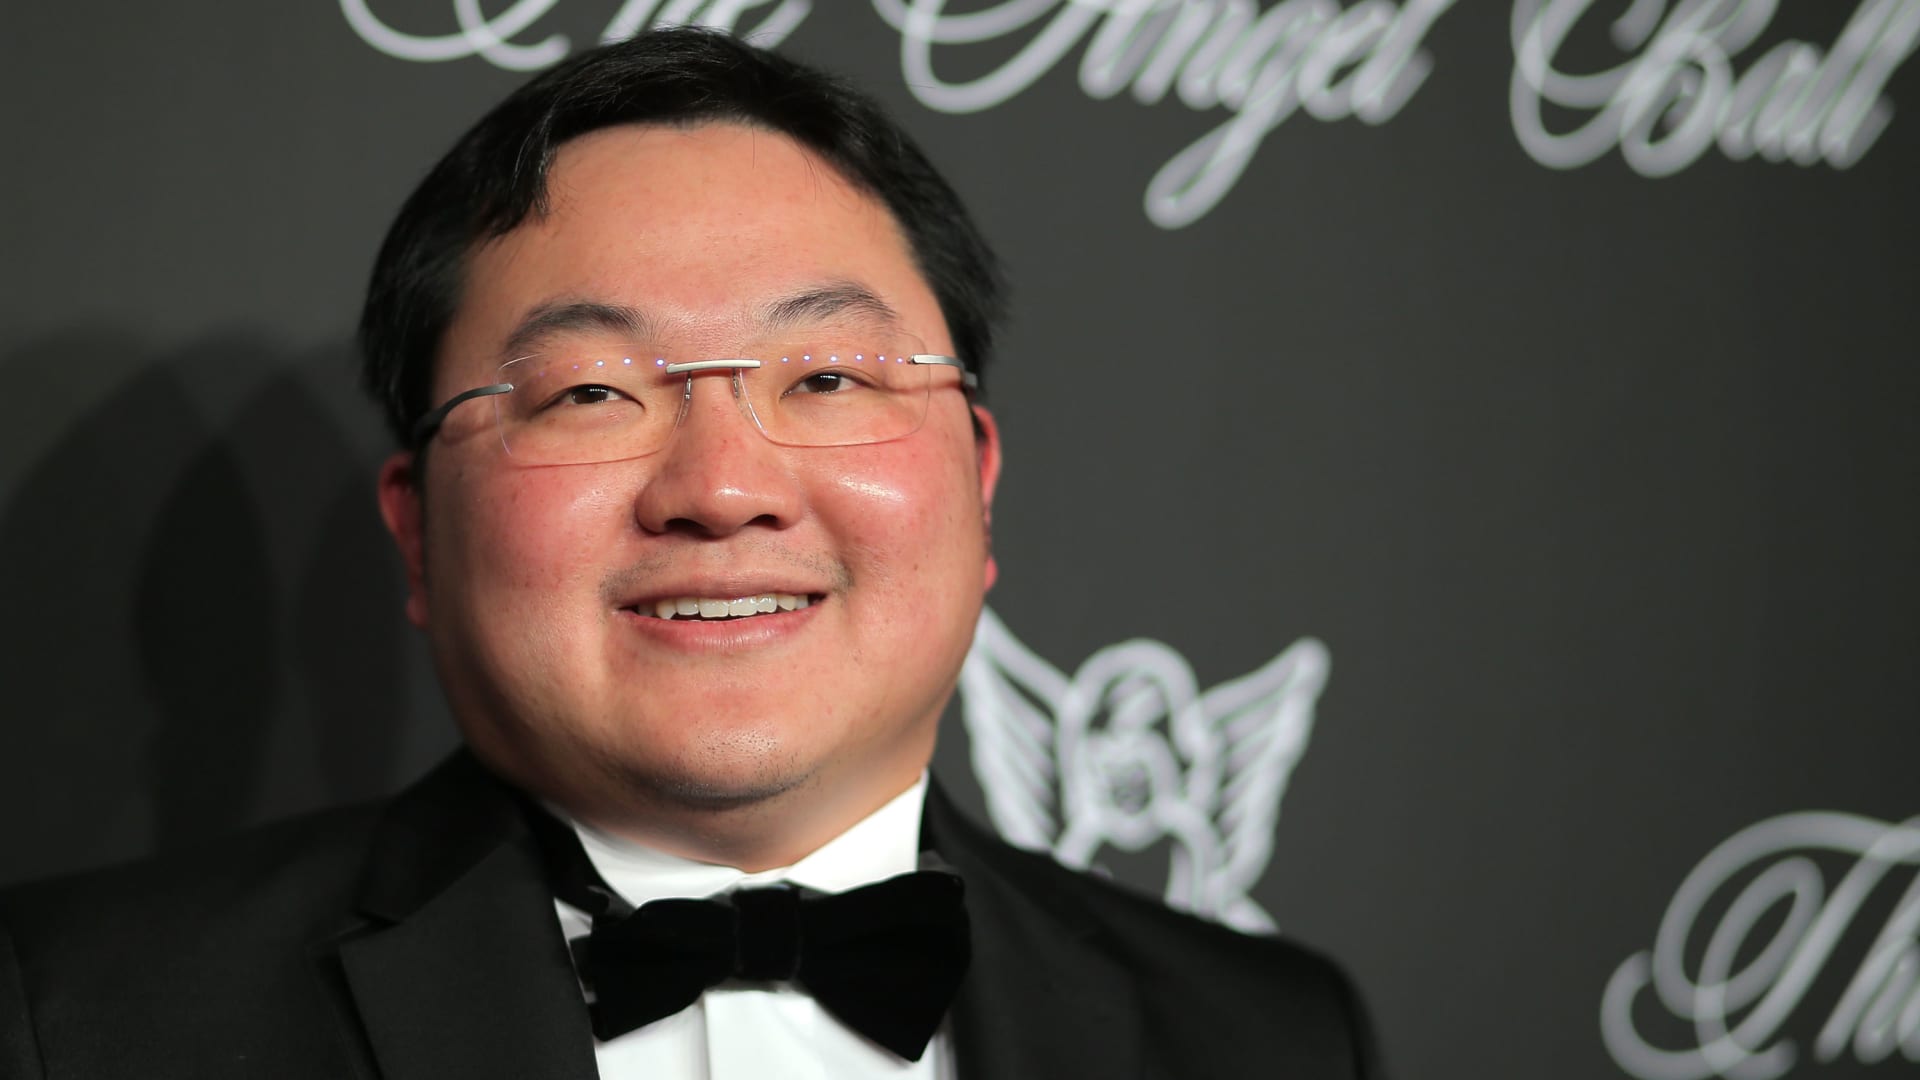 Honoree and Capital Limited CEO Mr. Jho Low attends Angel Ball 2014 at Cipriani Wall Street on October 20, 2014 in New York City.